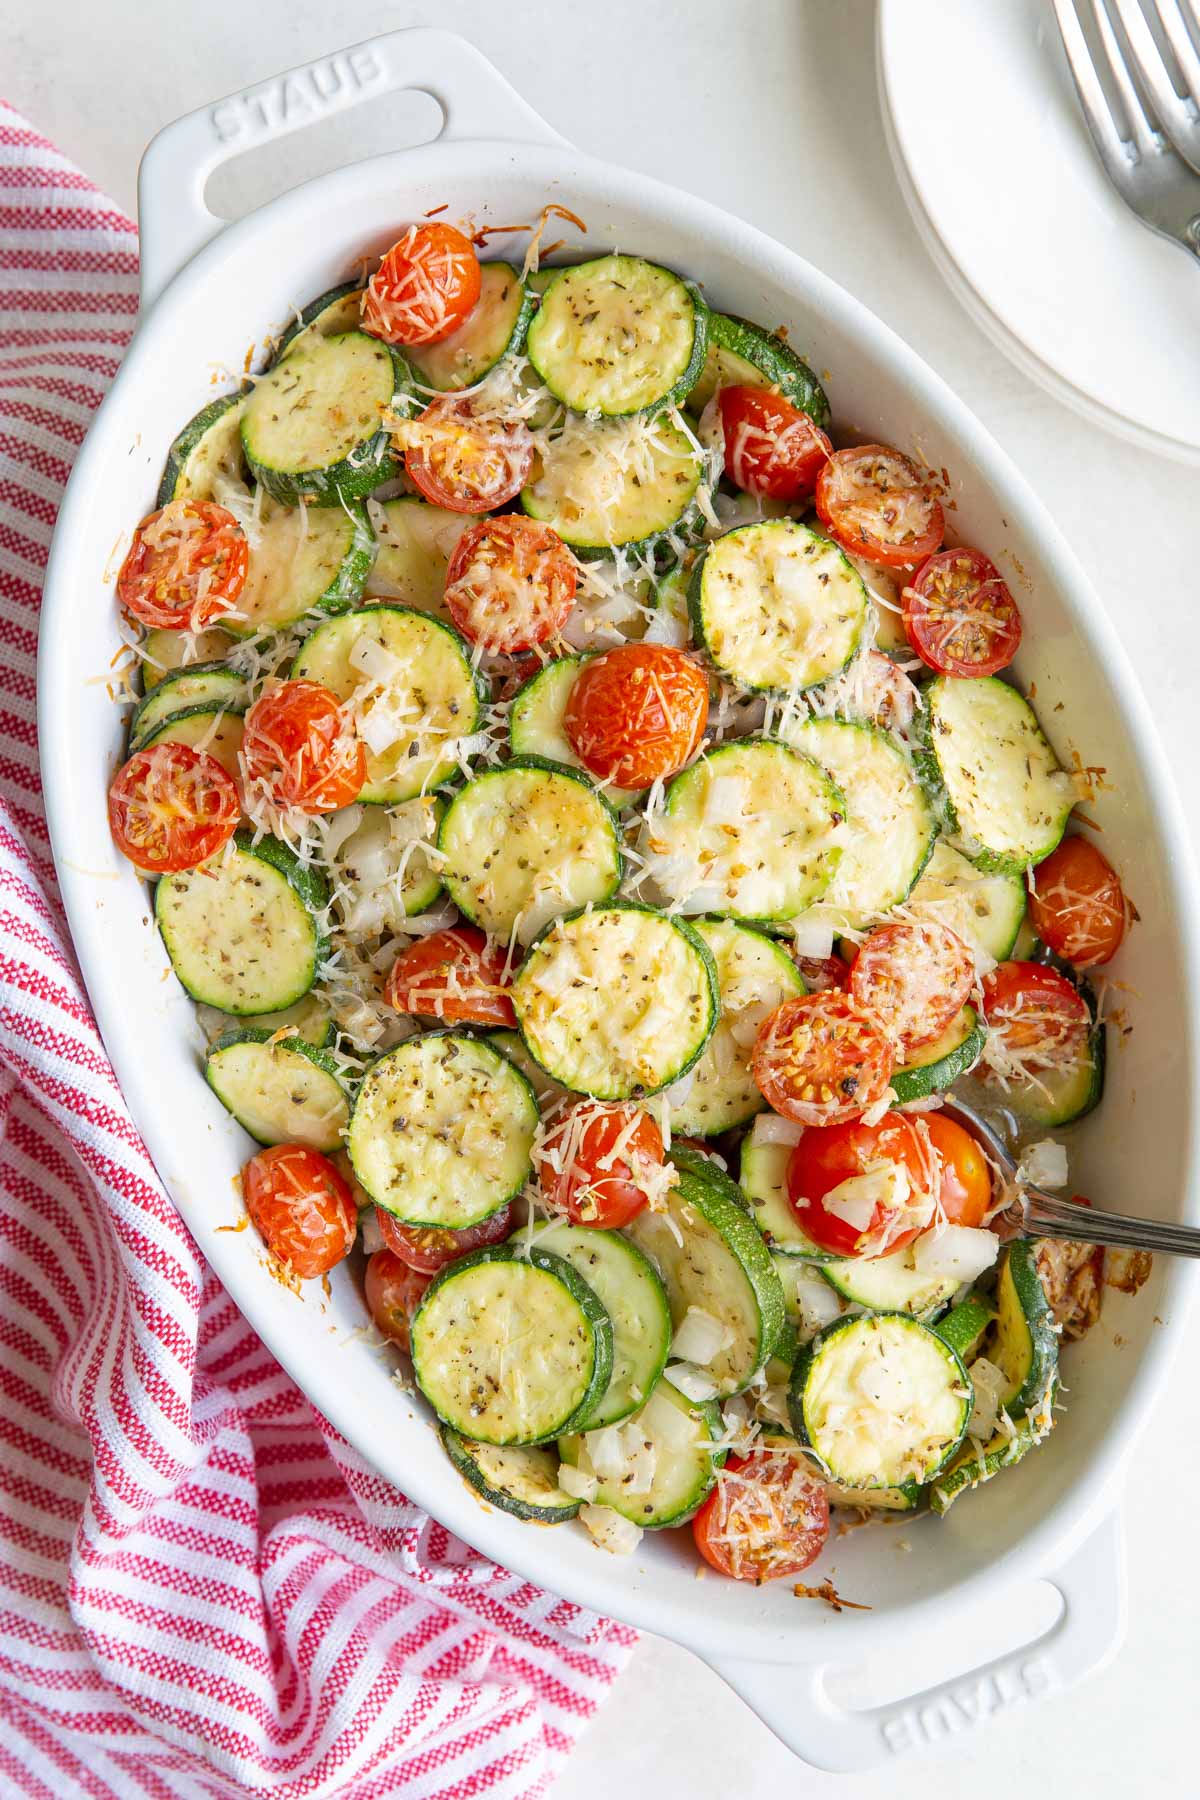 Overhead view of zucchini tomato bake in an oval white baking dish.